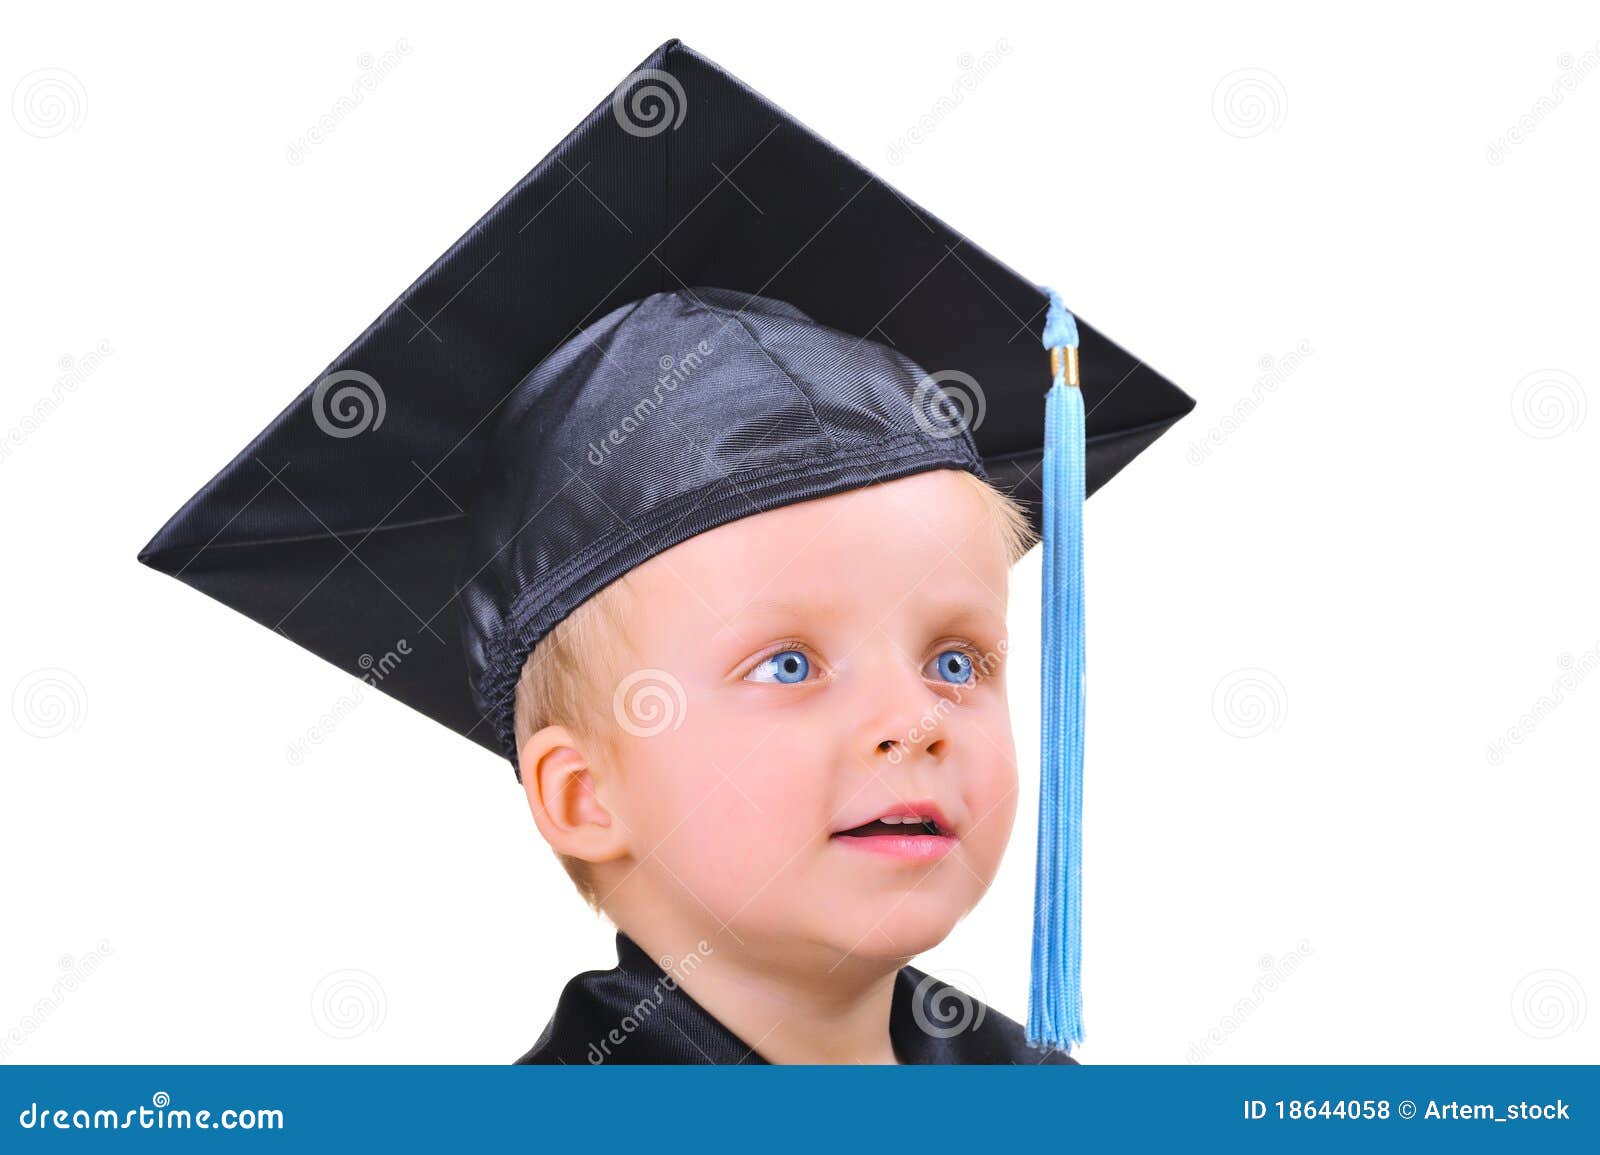 Baby Boy And Girl Wearing Graduation Gown And Cap. Royalty Free SVG,  Cliparts, Vectors, and Stock Illustration. Image 62399758.